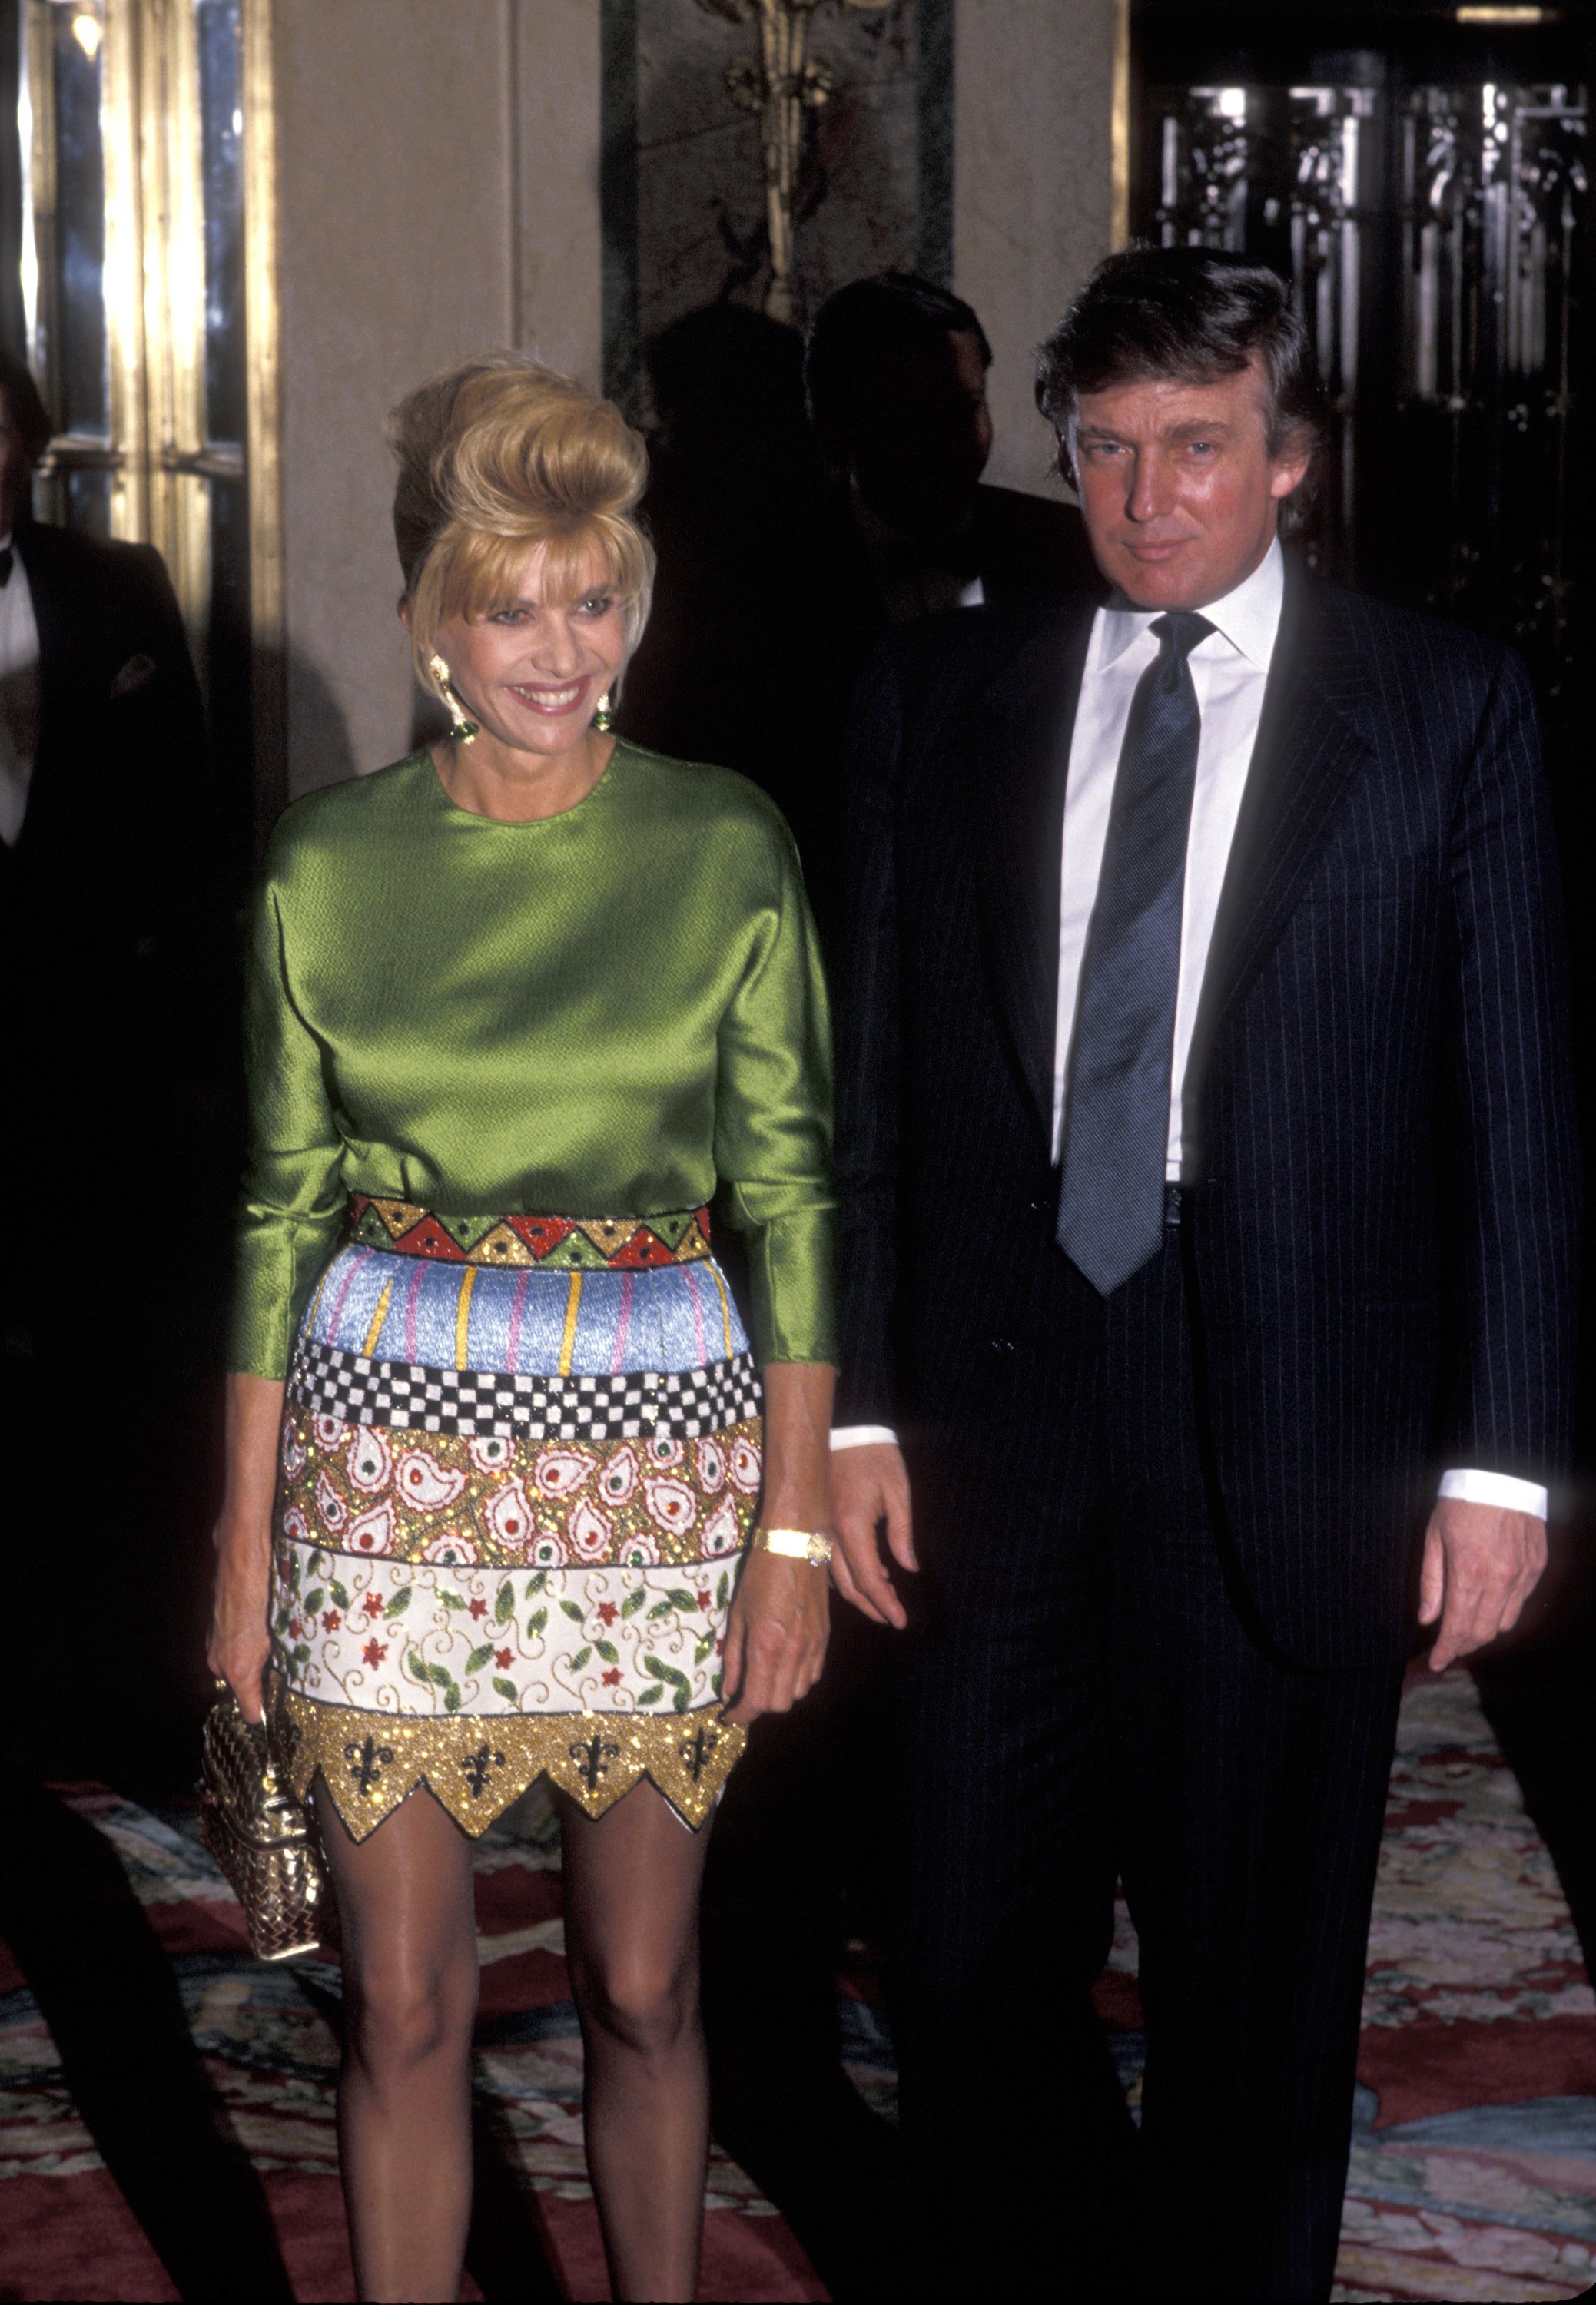 Businesswoman Ivana Trump and politician Donald Trump pictured at the Man of the Year Awards in 1991. | Source: Getty Images